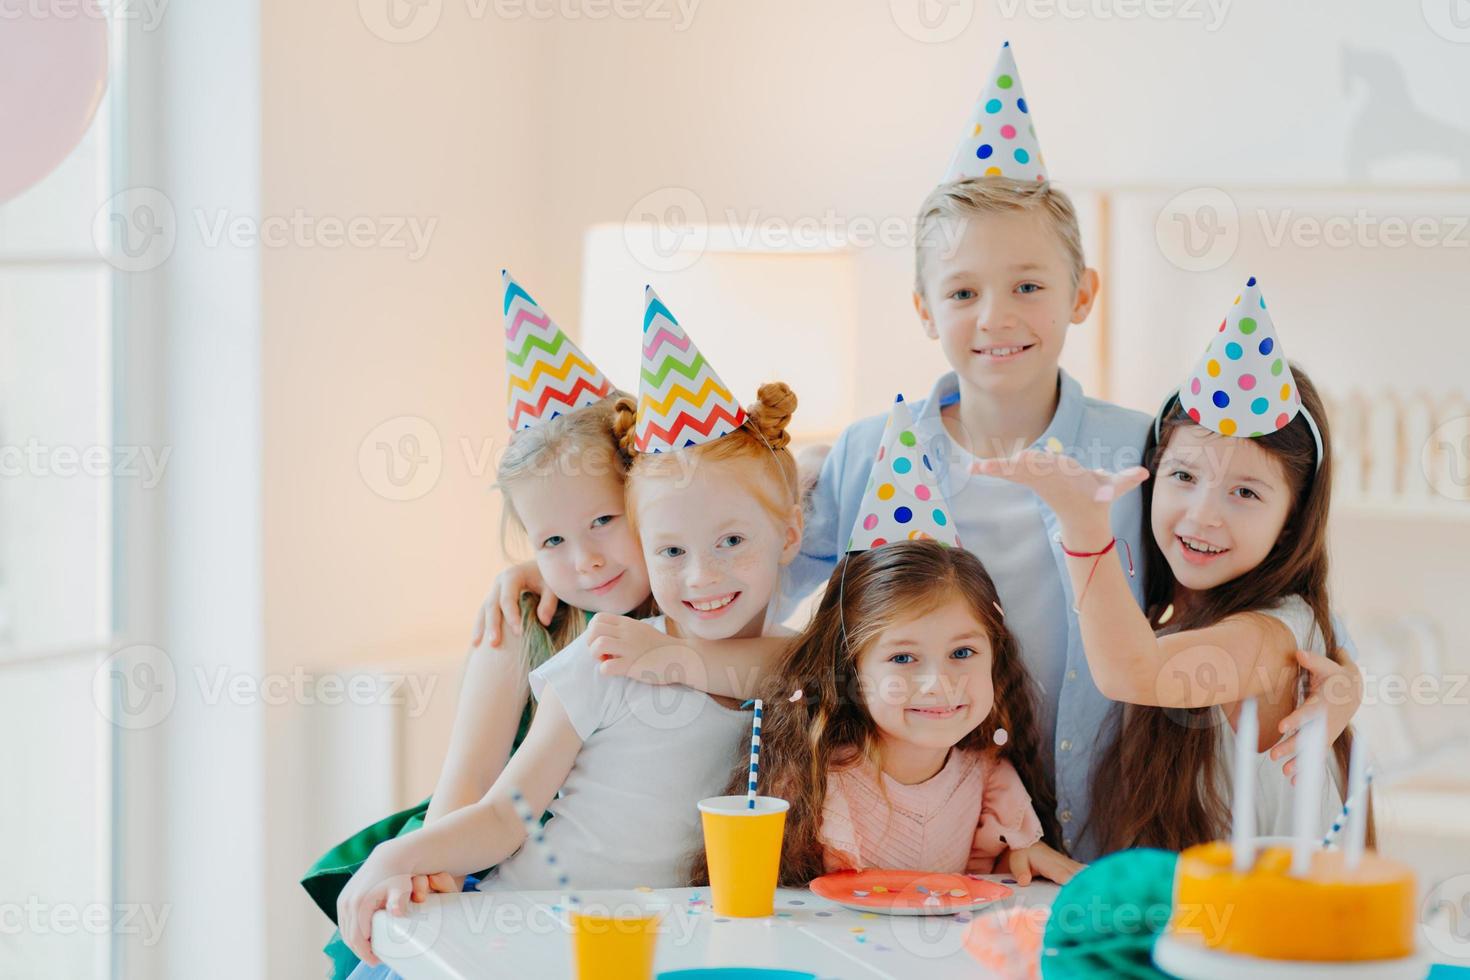 Indoor shot of happy kids celebrate party with falling confetti, wear cone party hats, pose near festive table with cakes, embrace and pose together. Childrens birthday photo